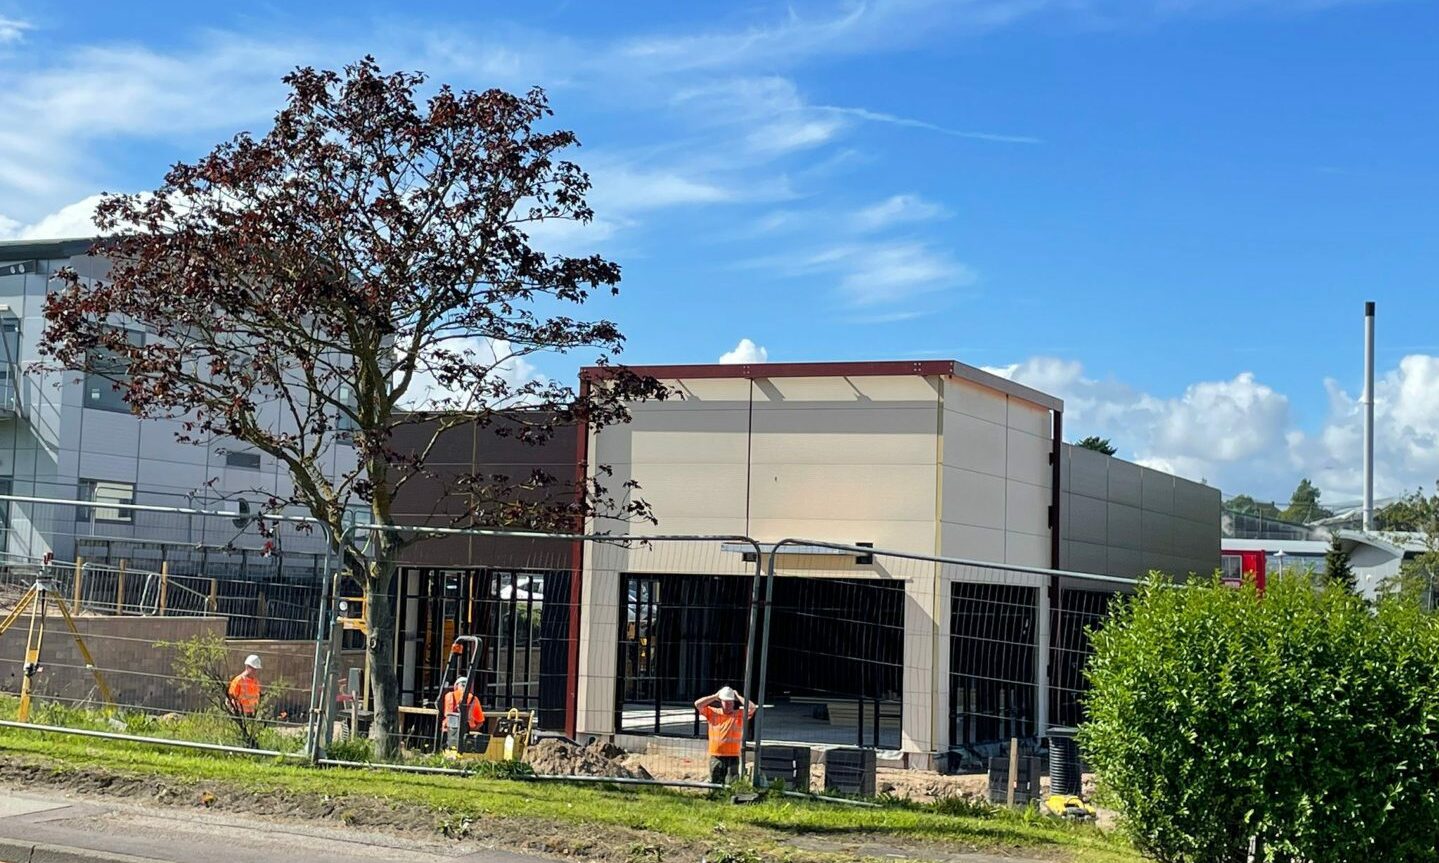 The new Tim Hortons structure as seen from Wellington Road.